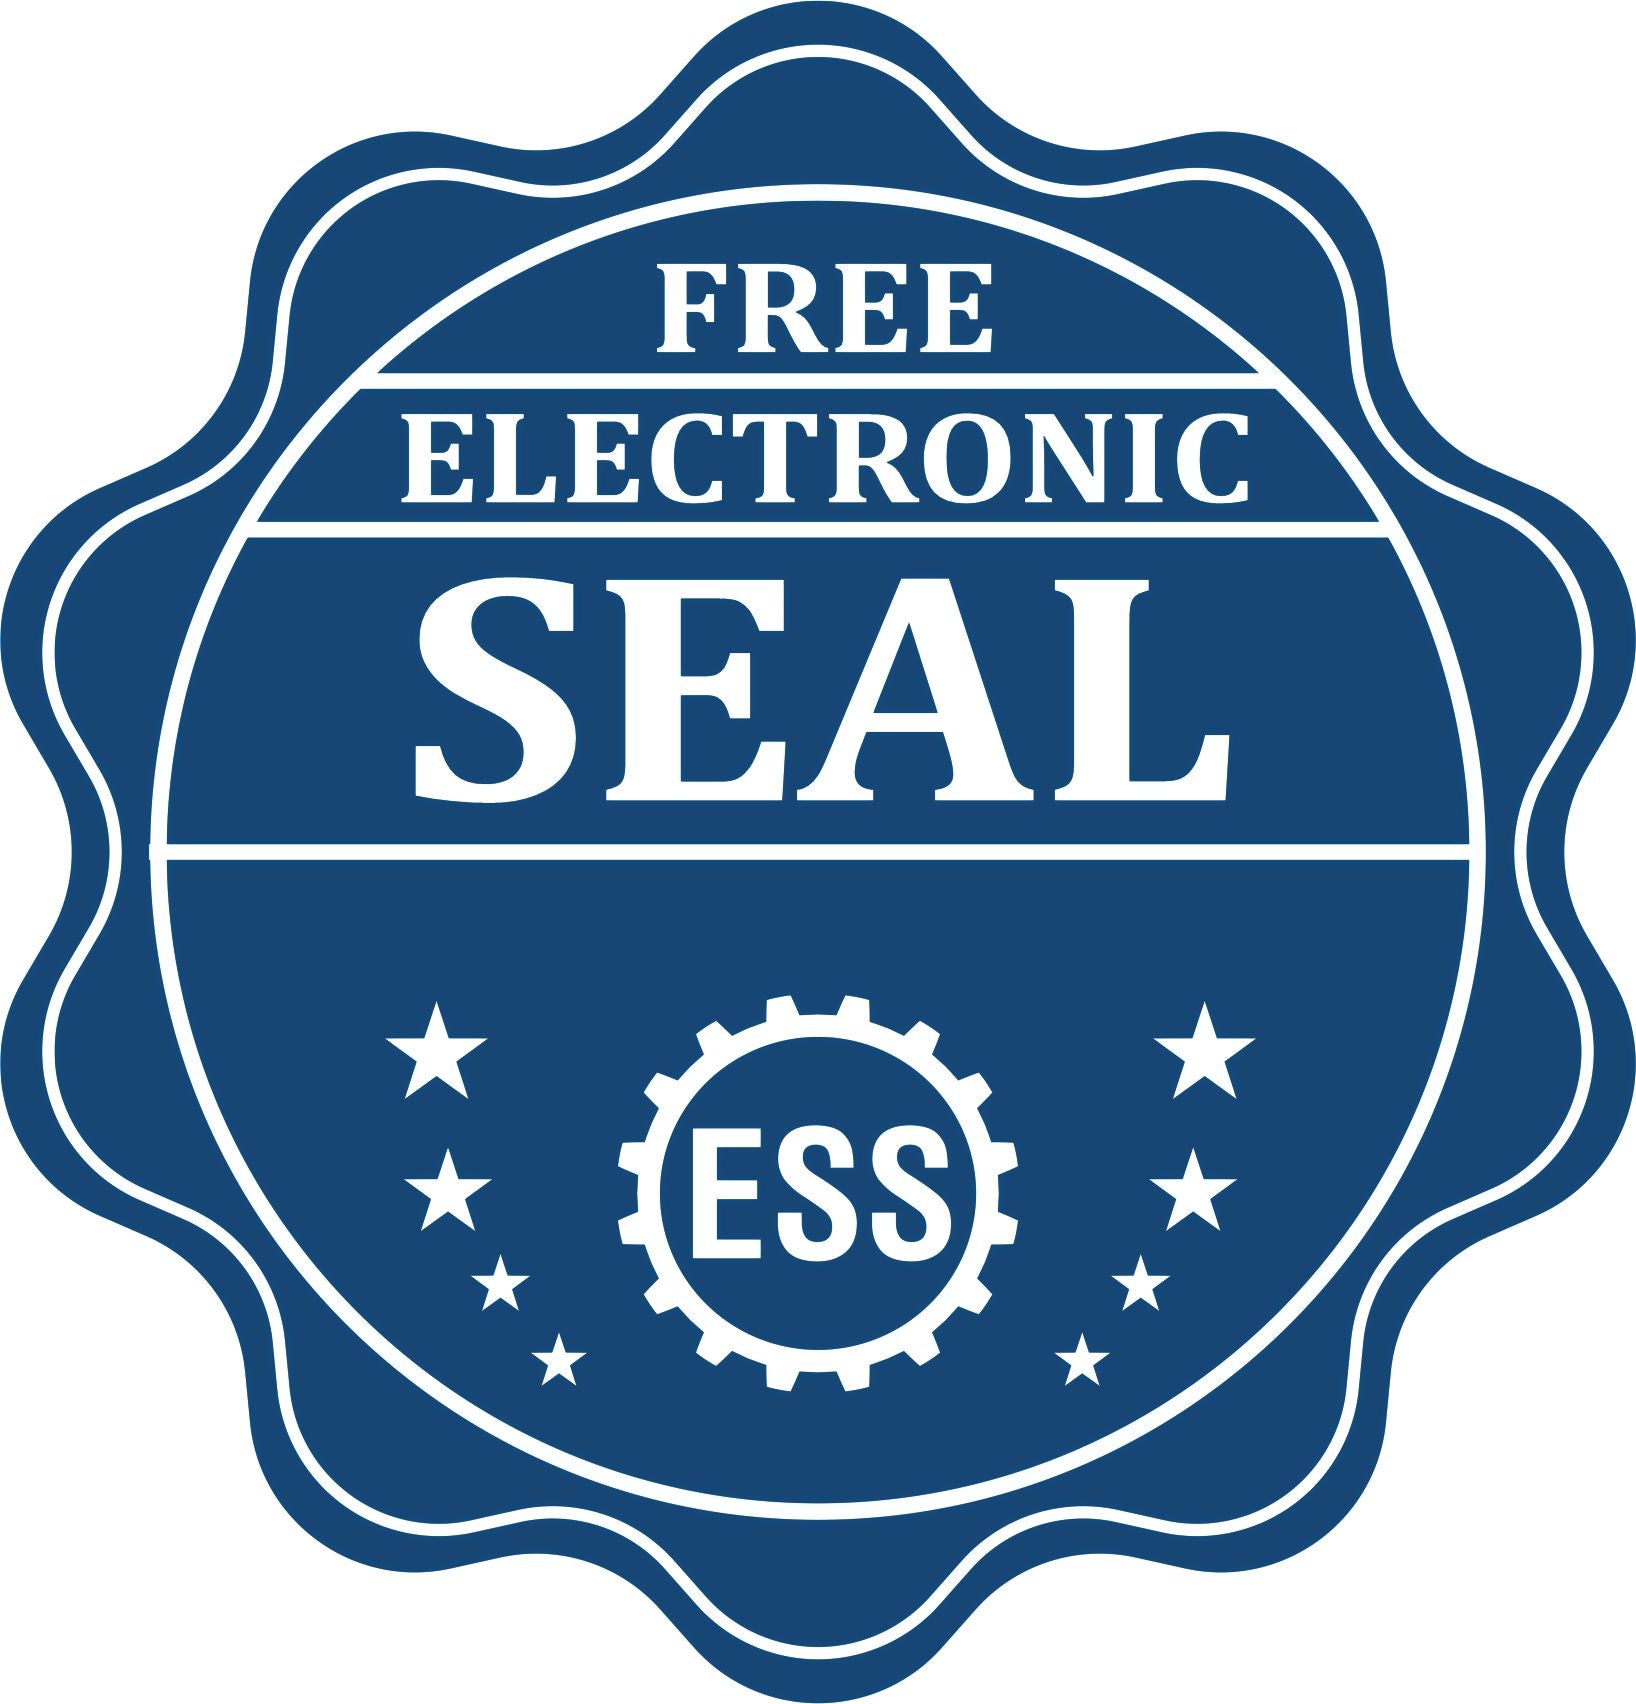 A badge showing a free electronic seal for the Heavy Duty Cast Iron Iowa Land Surveyor Seal Embosser with stars and the ESS gear on the emblem.